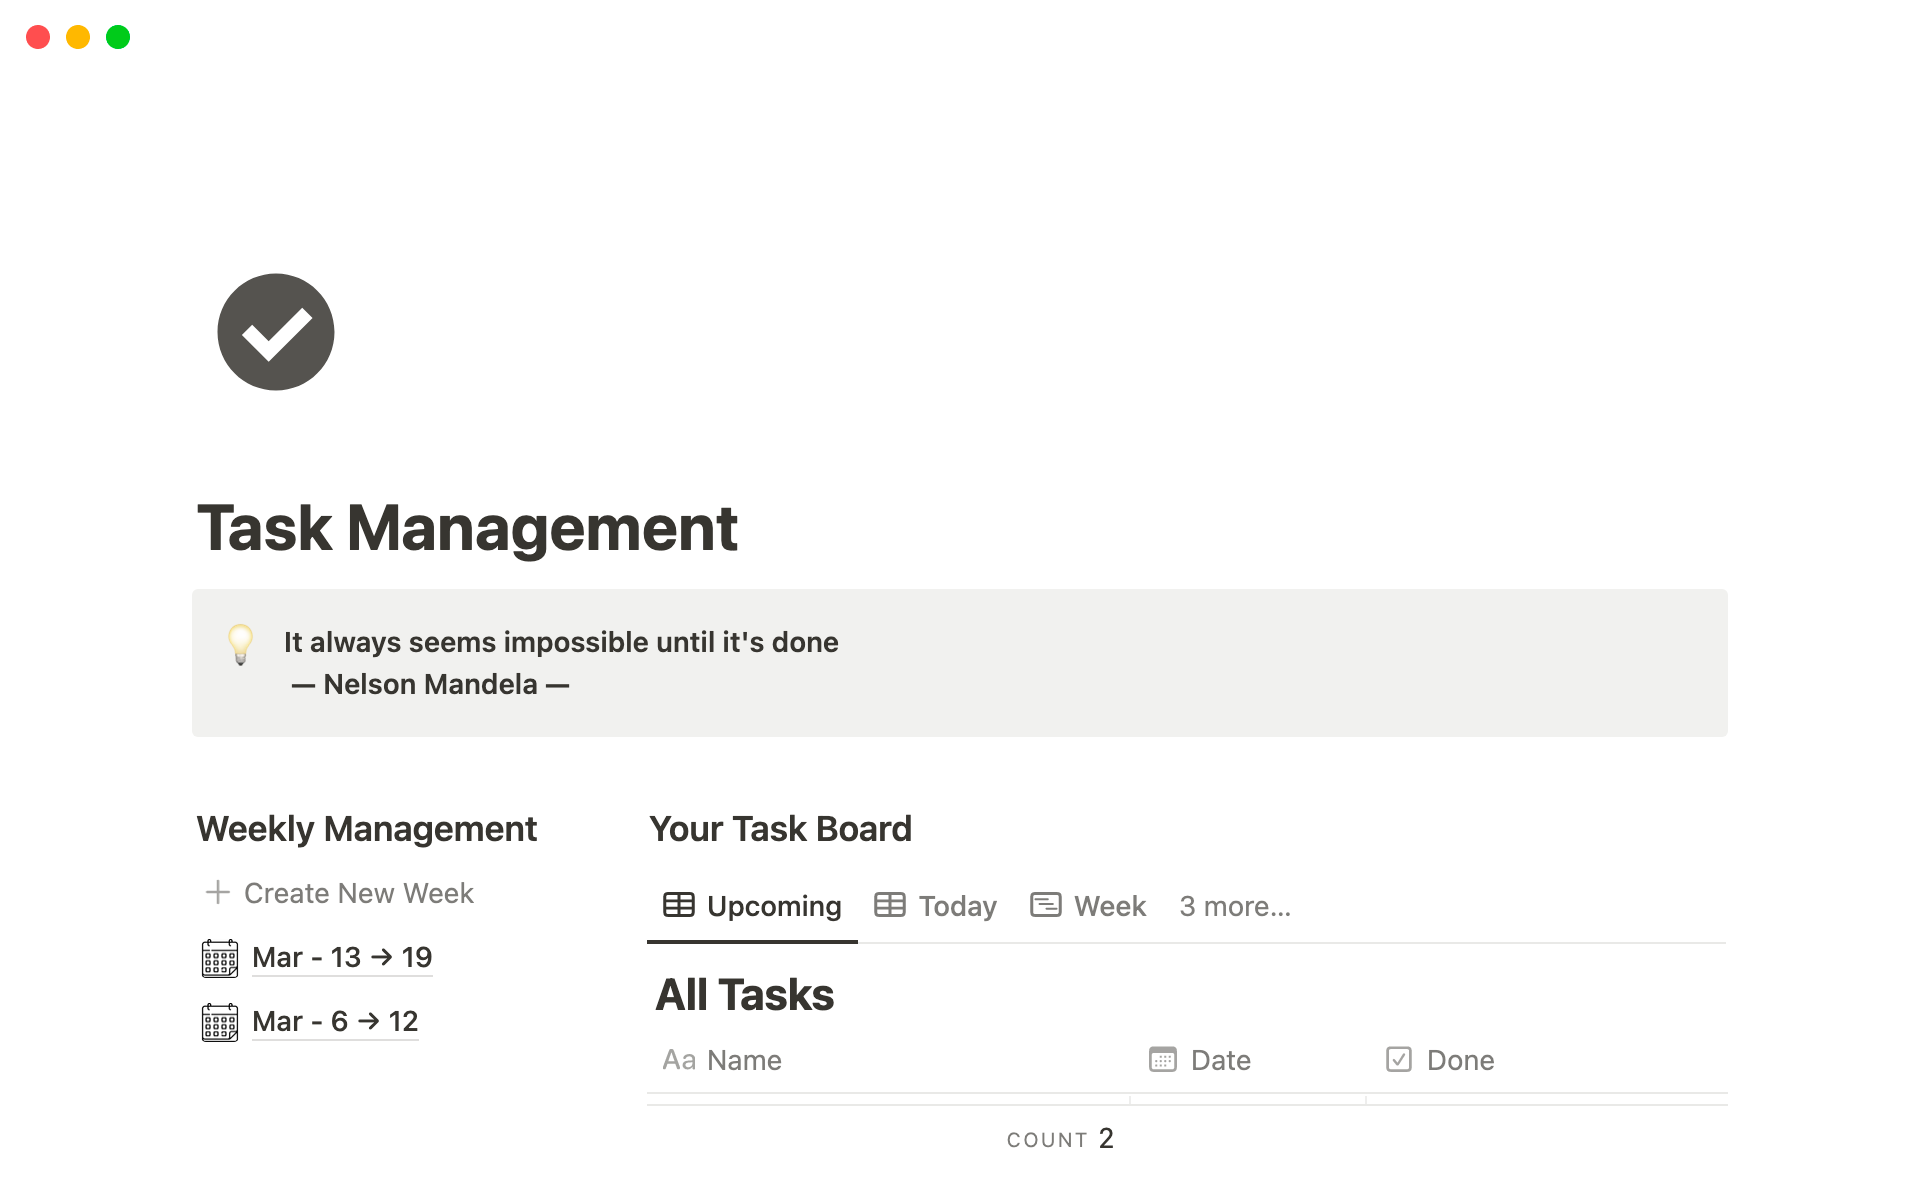 This is the centralized page for you to manage all tasks of life, including all tasks in the future, and weekly focus view which help a lot on concentrating on work.